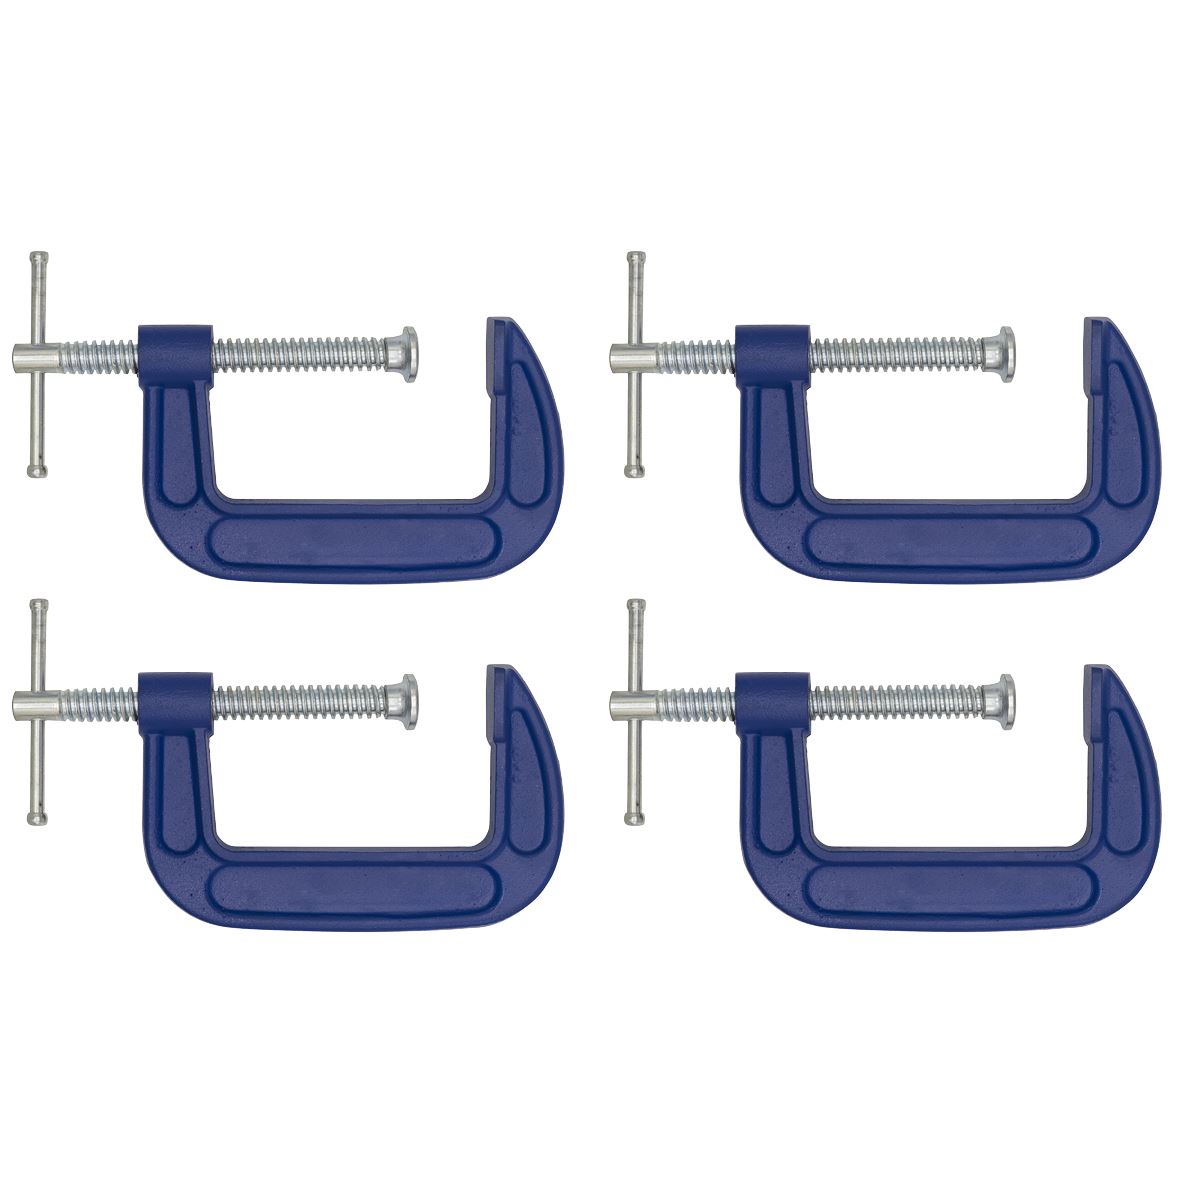 Sealey G-Clamp 75mm - Pack of 4